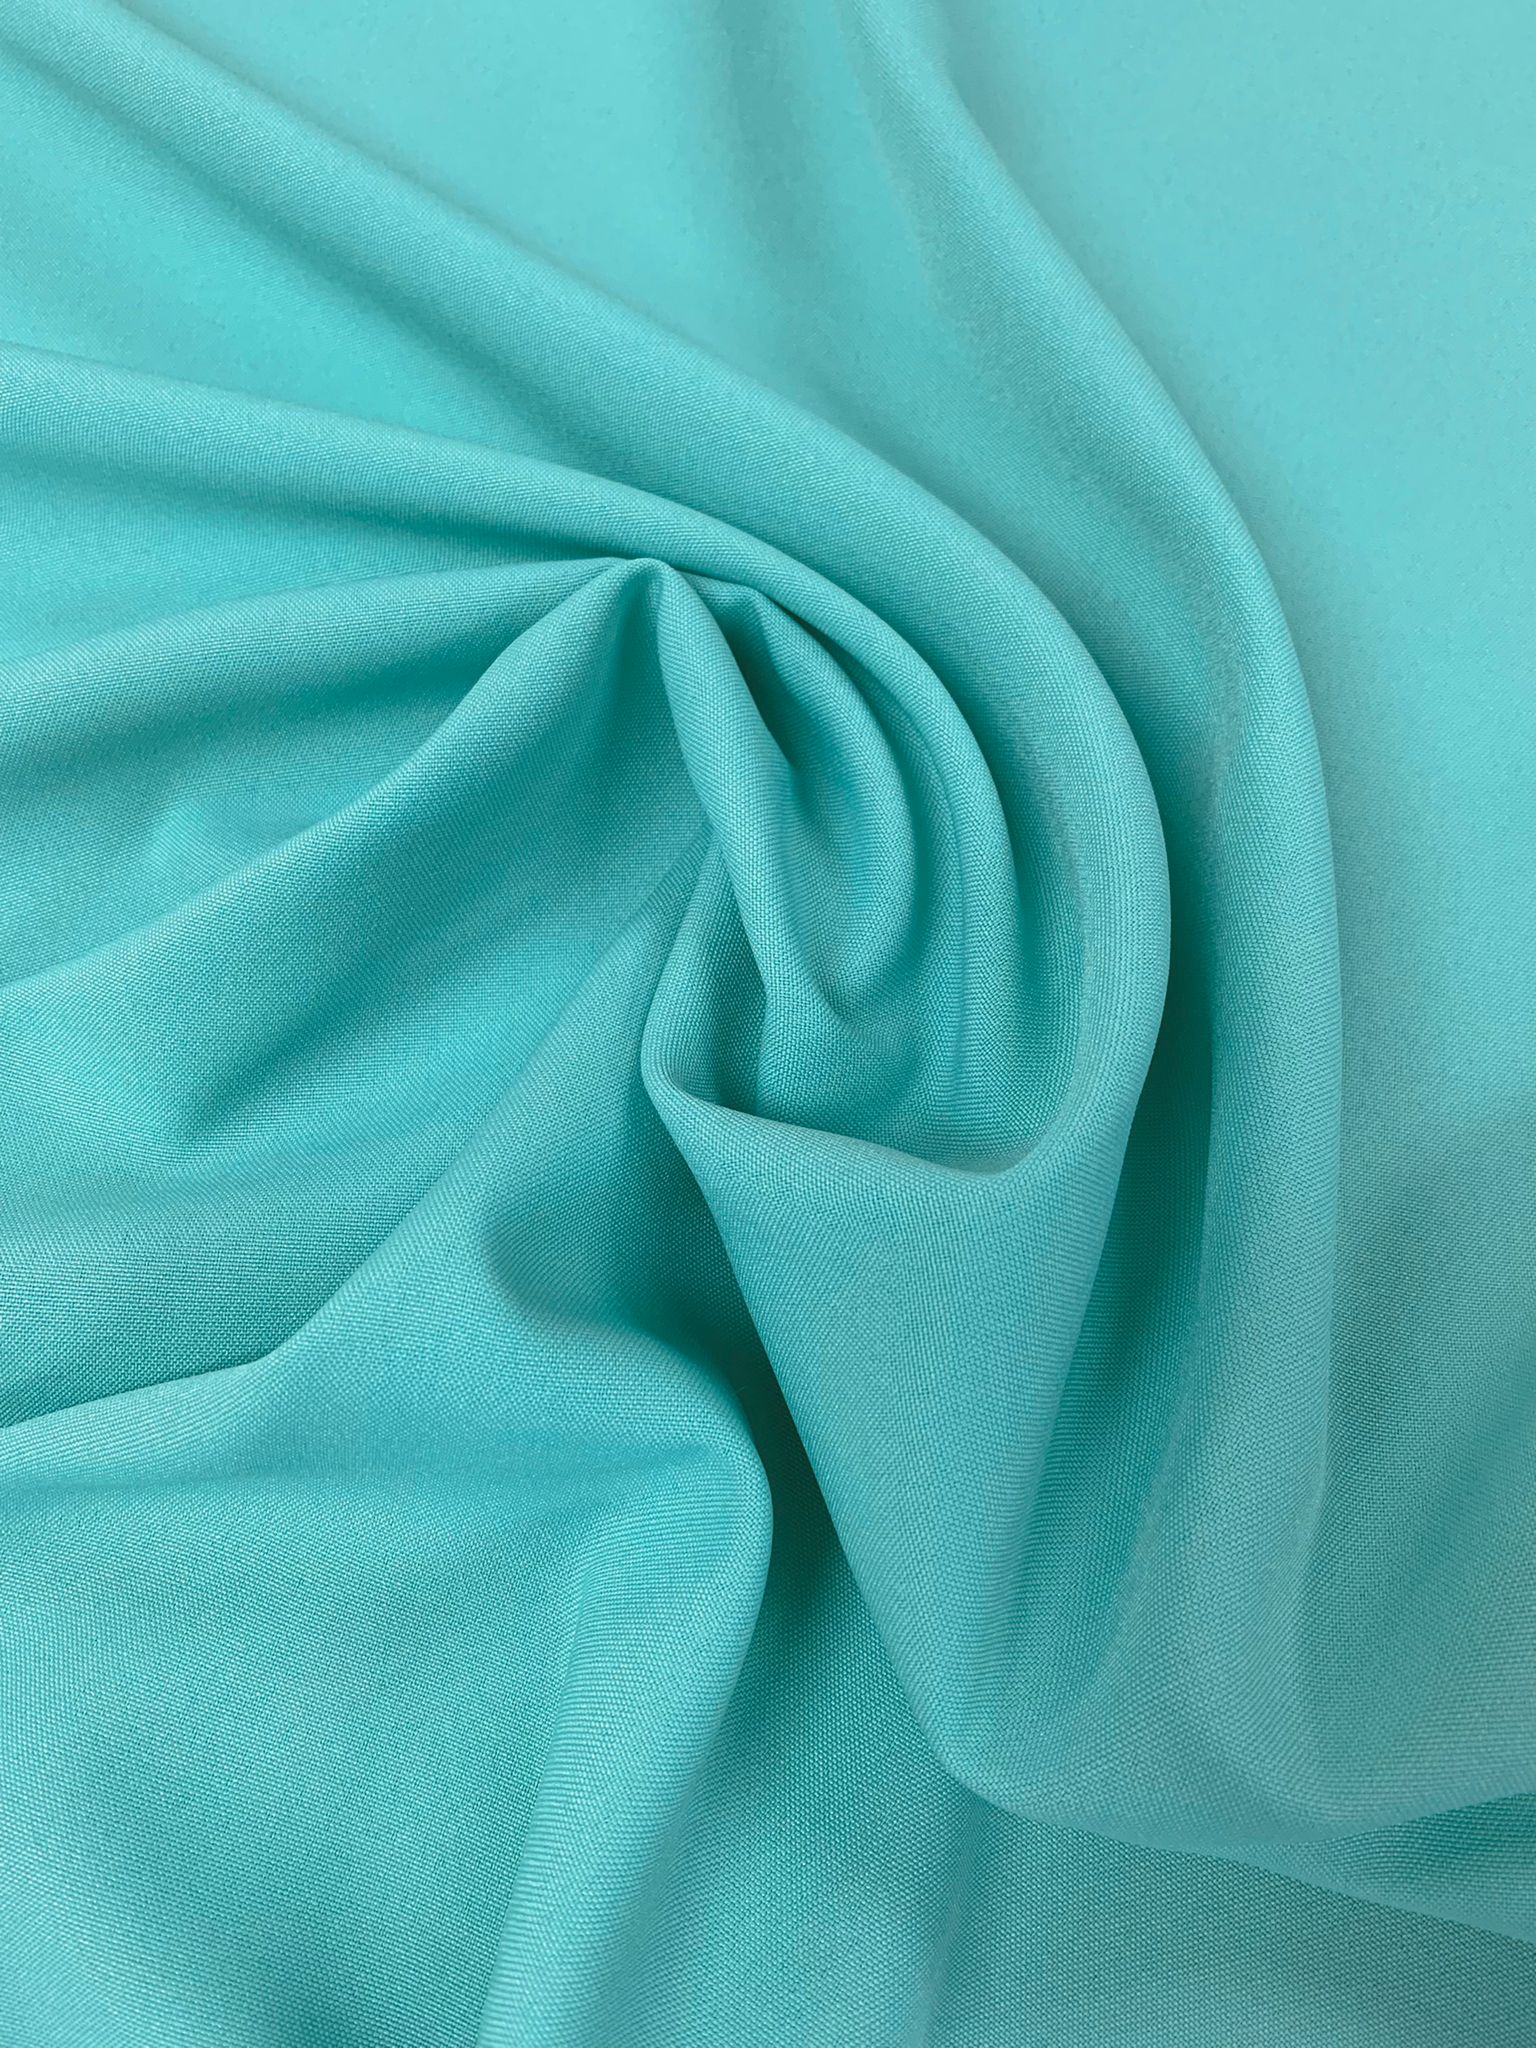 Polyester Tiffany Blue Table Linen